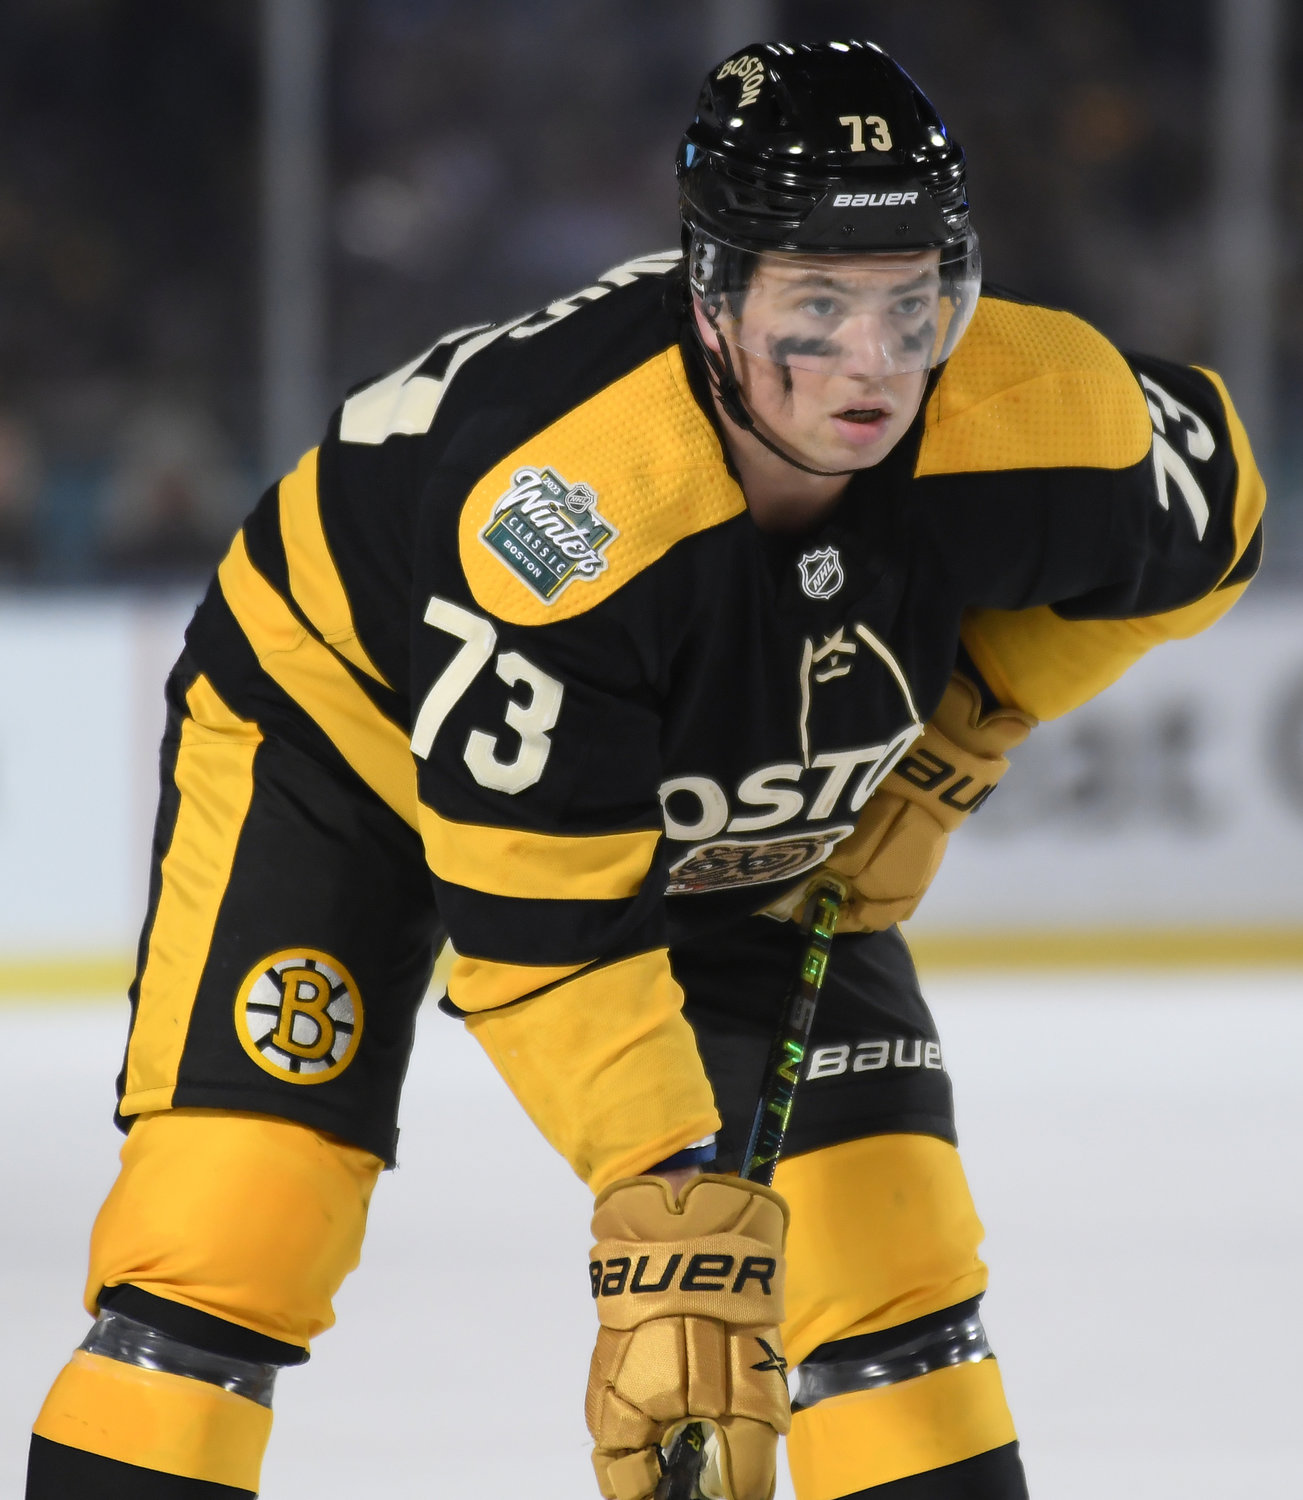 Long Beach native Charlie McAvoy played in the NHL's annual outdoor Winter Classic showcase game Jan. 2 at Boston's Fenway Park.